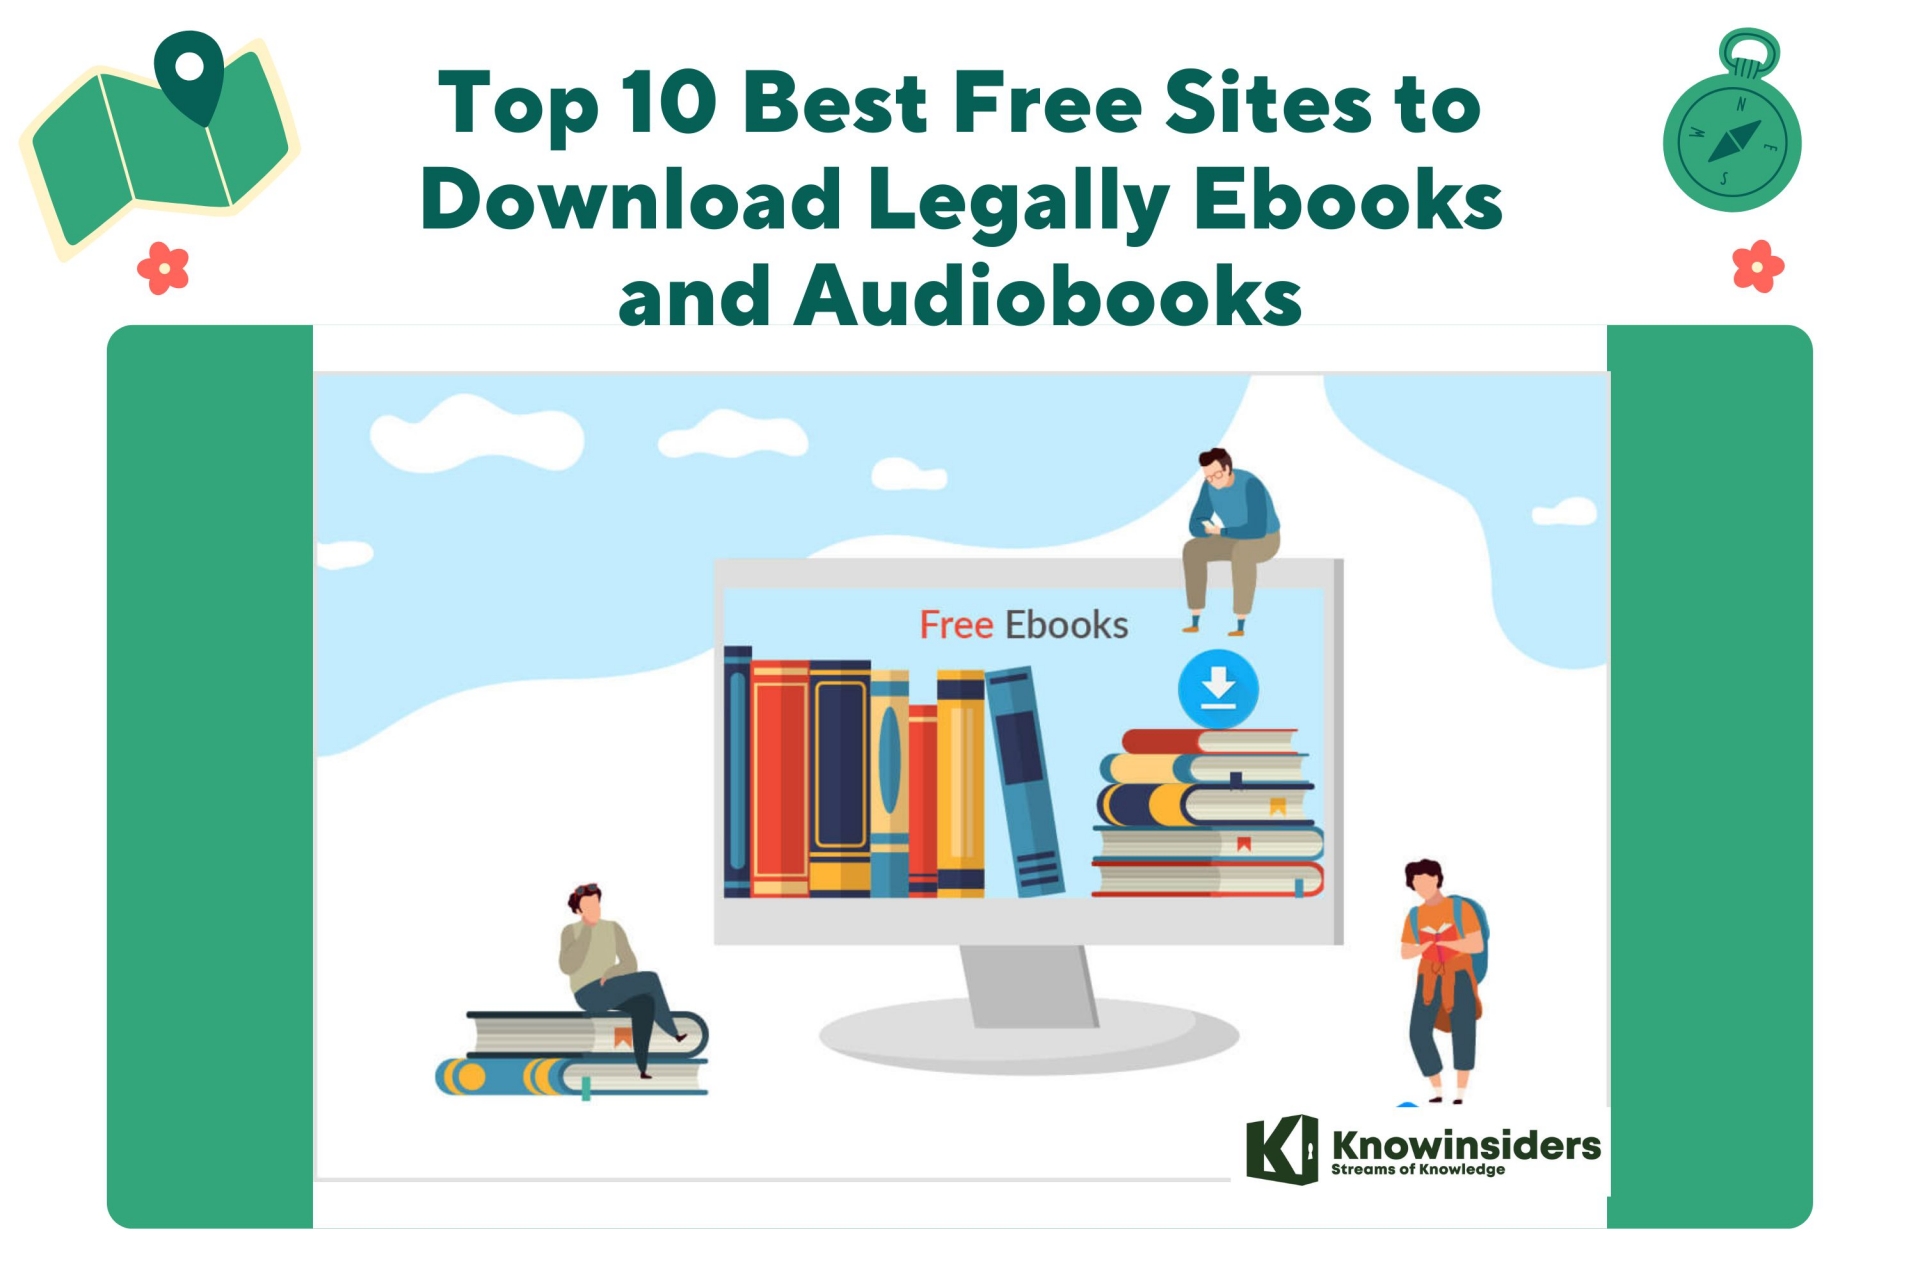 Sites to free download ebooks and audiobooks. Photo: KnowInsiders